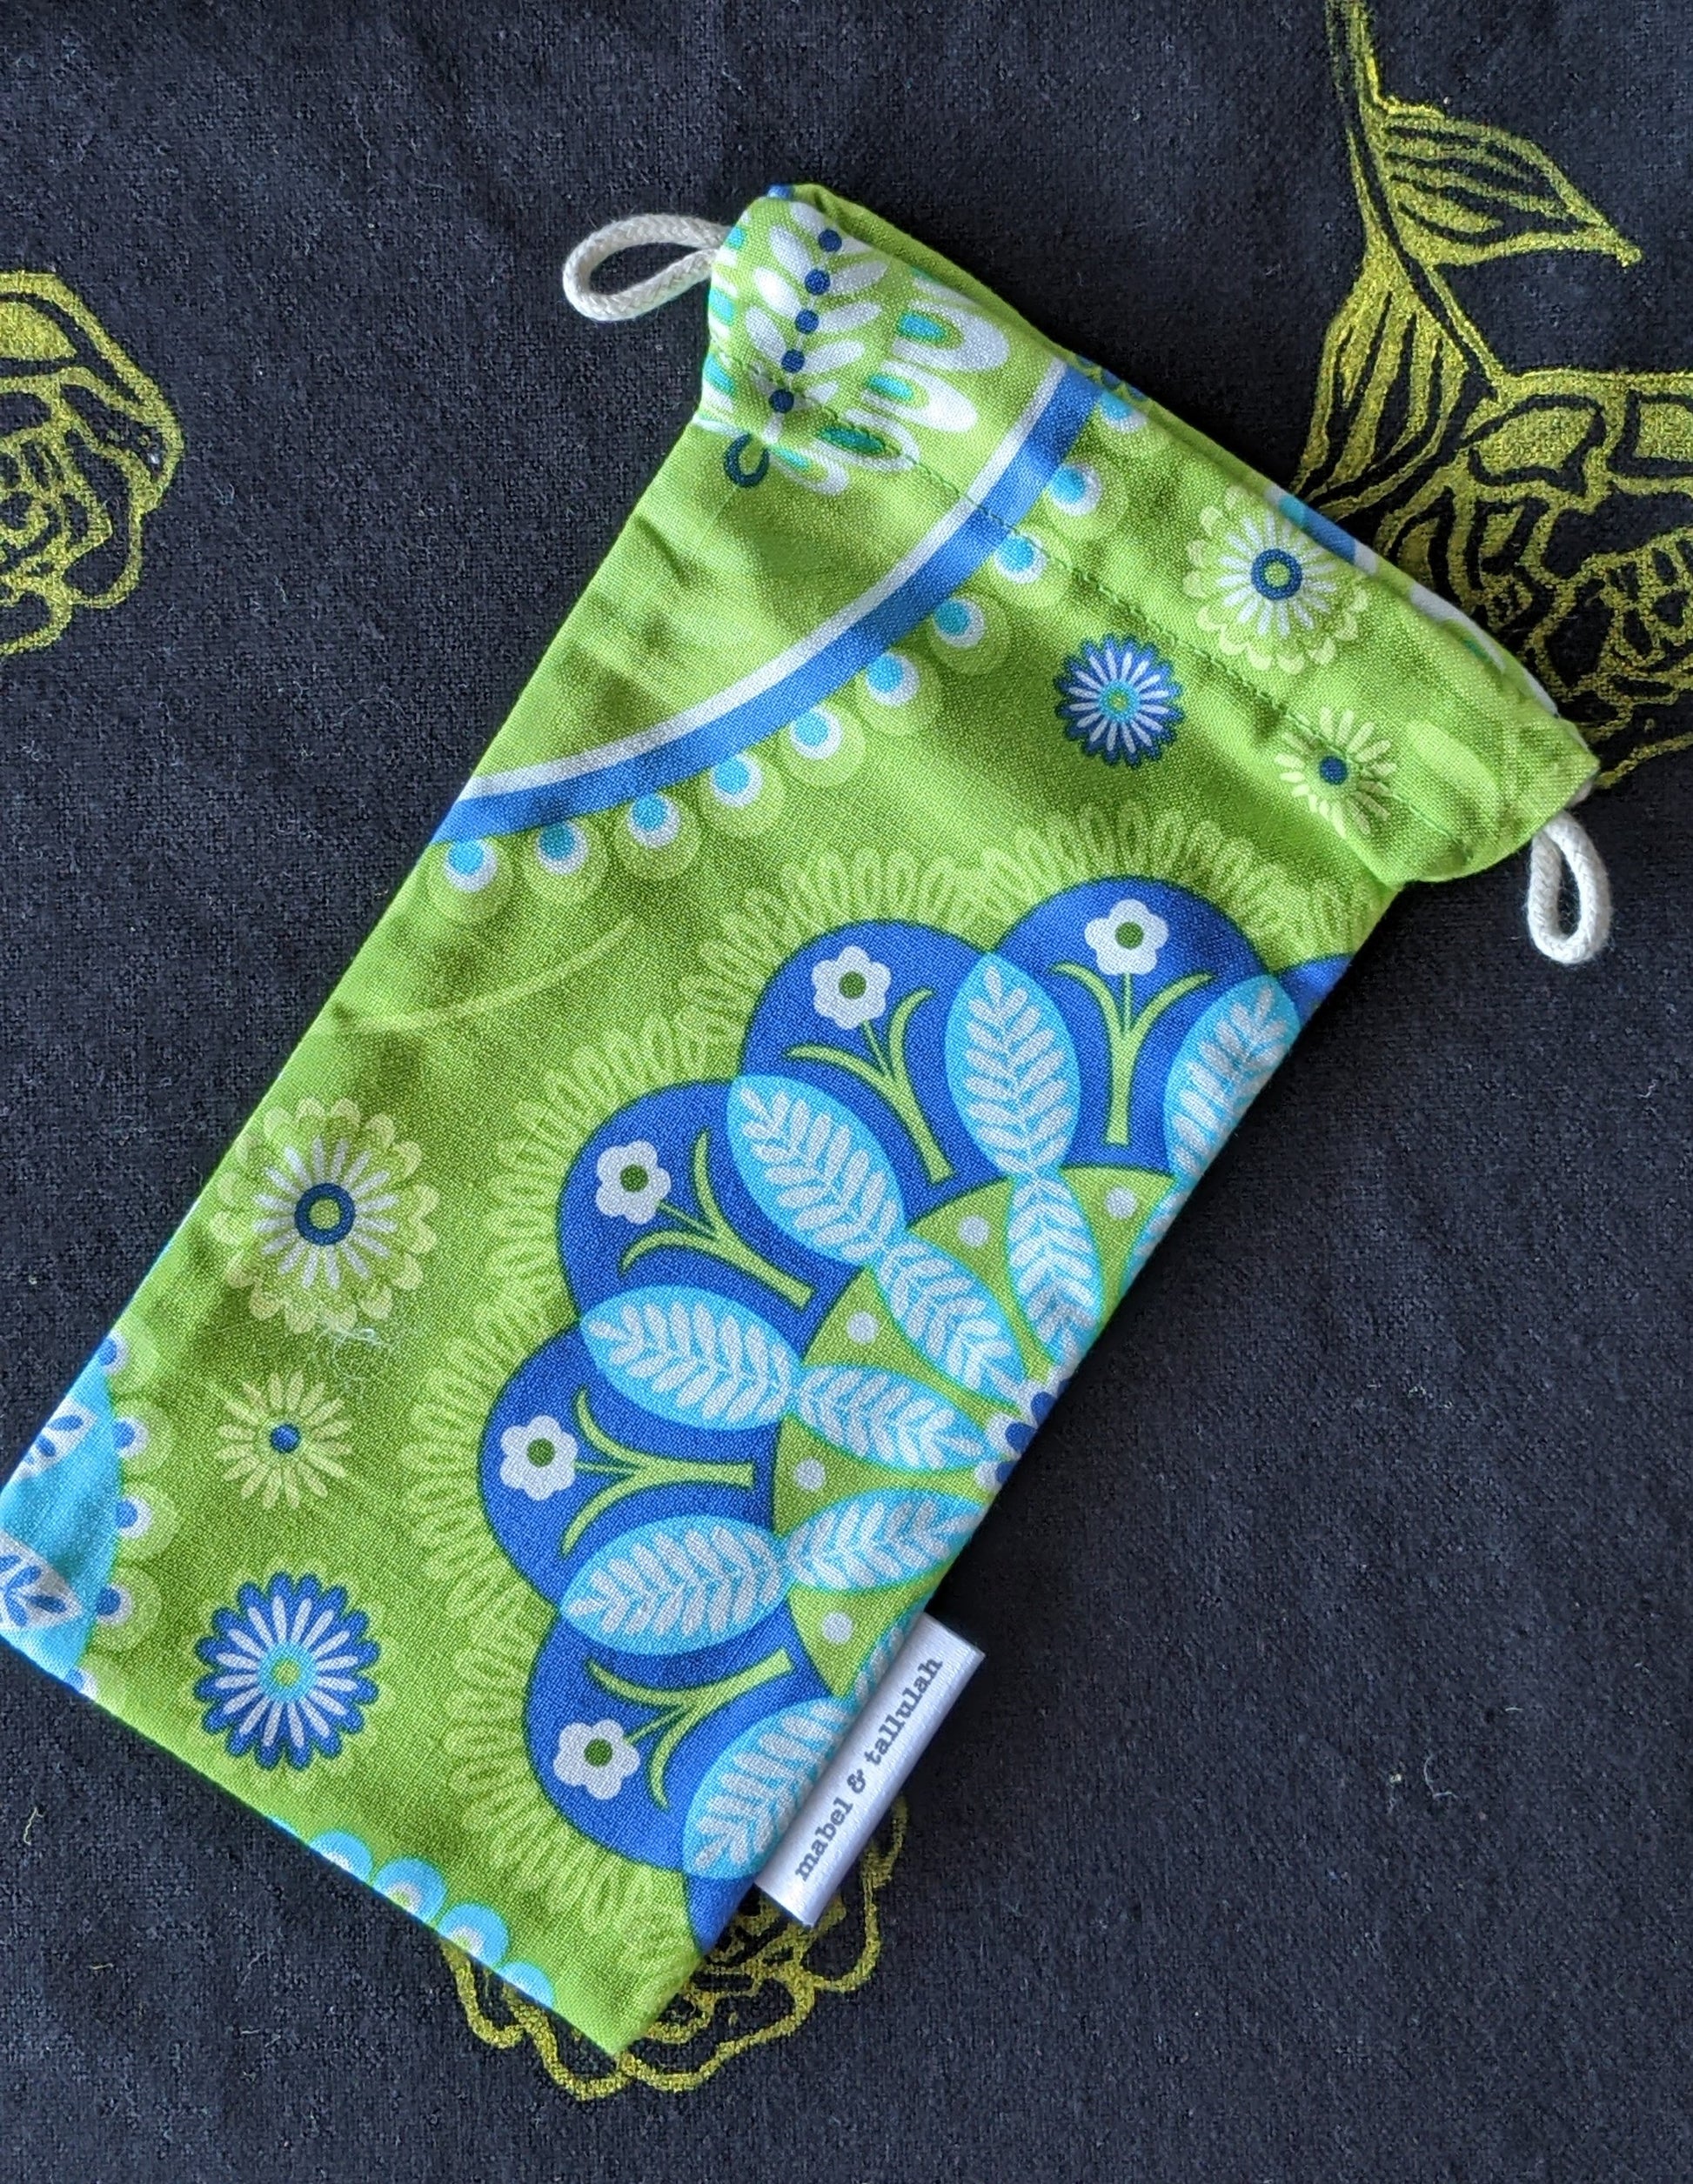 Green blue motif sunglasses cover mini pouch by The Arthly Box